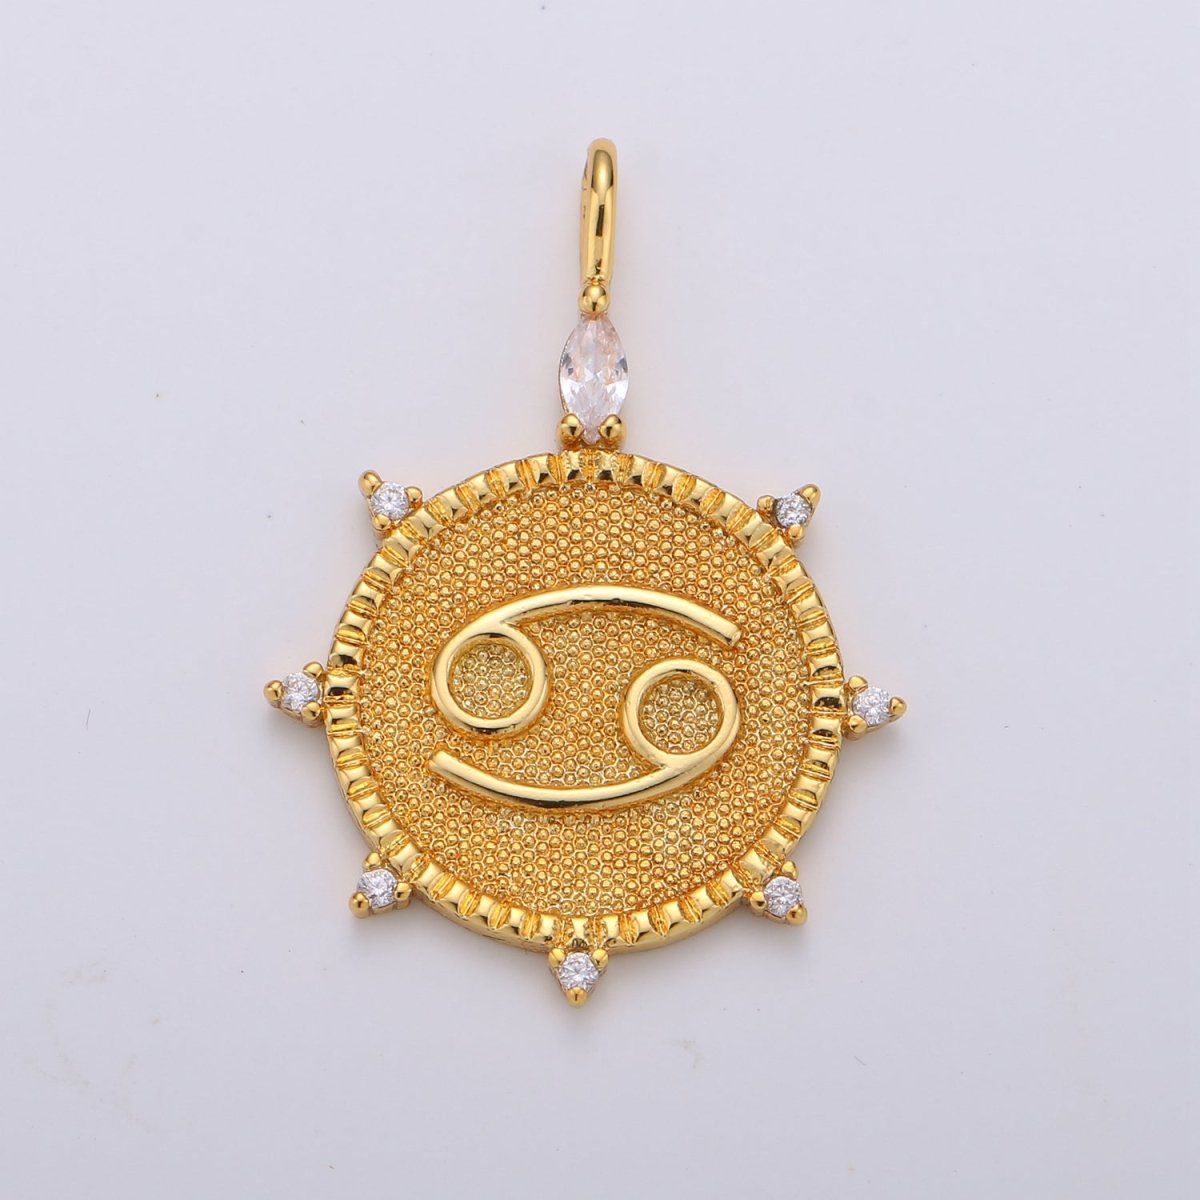 24k Gold Filled Zodiac Charms, Astrology Charms, Zodiac Necklace Charms, 12 Zodiac Charms for Jewelry Making Supply A-495-A-506 - DLUXCA